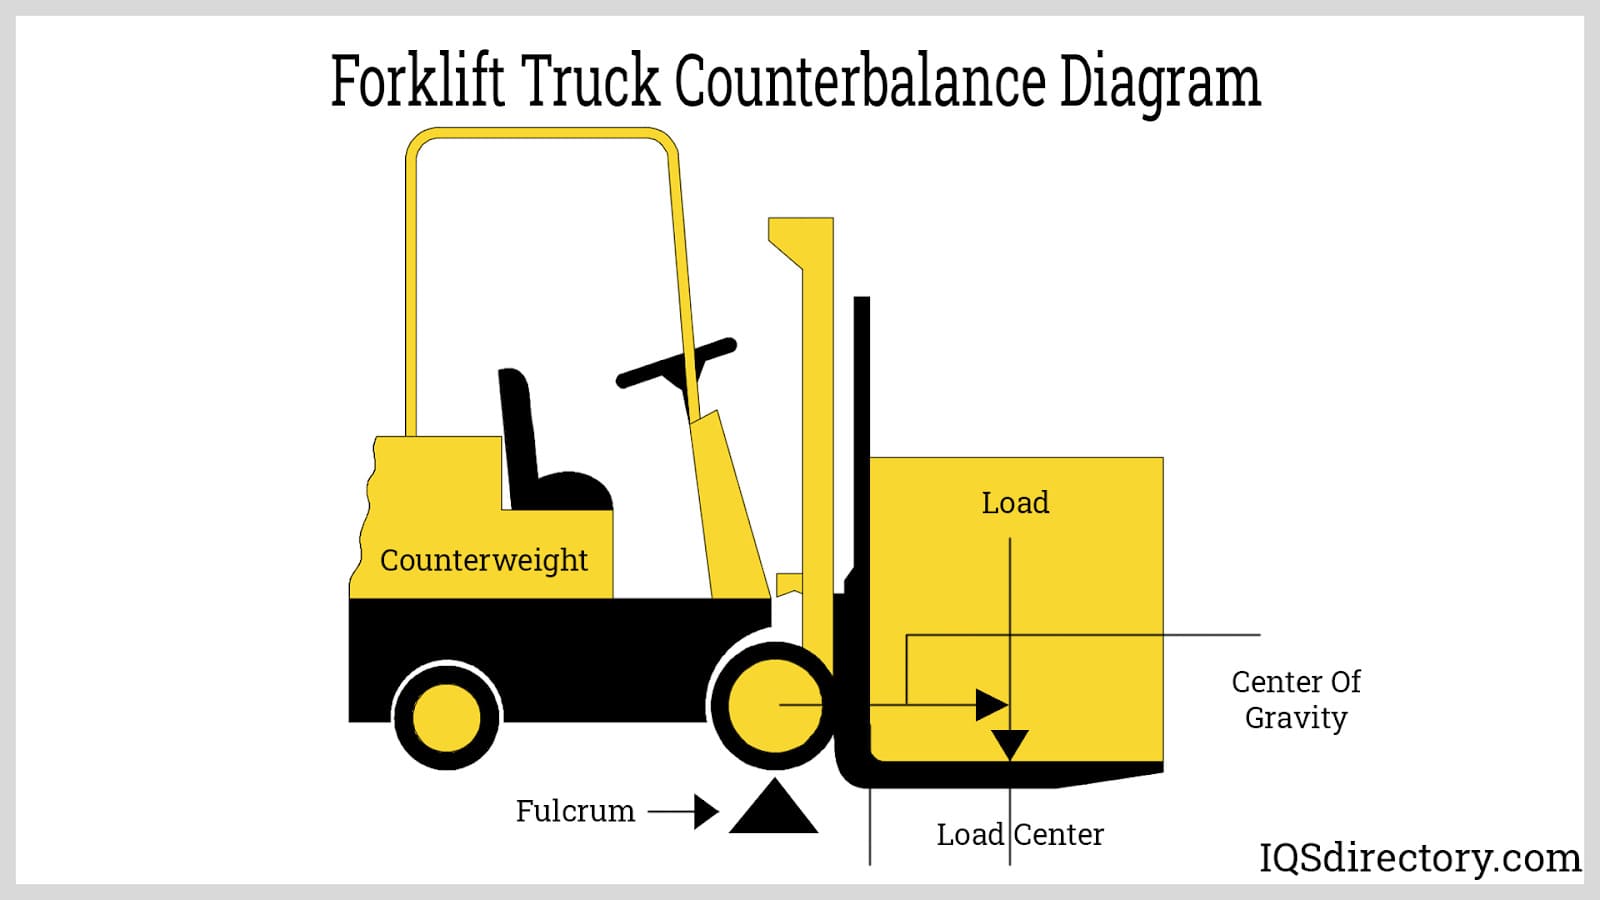 Forklift Truck Counterbalance Diagram